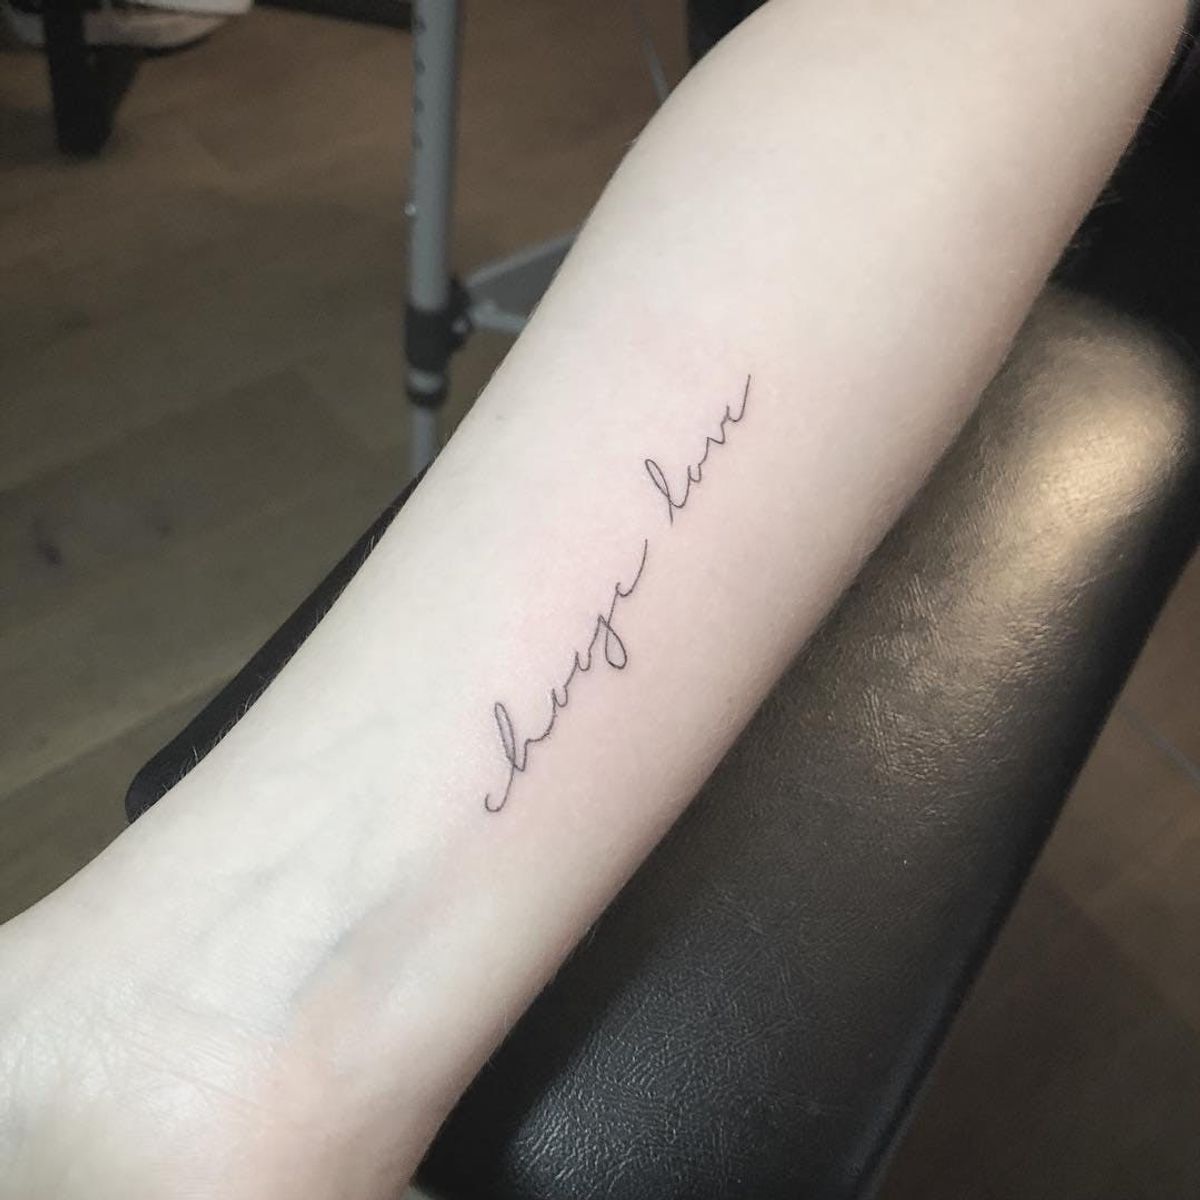 These Quote Tattoos May Be Small, But They’re Mighty With Meaning